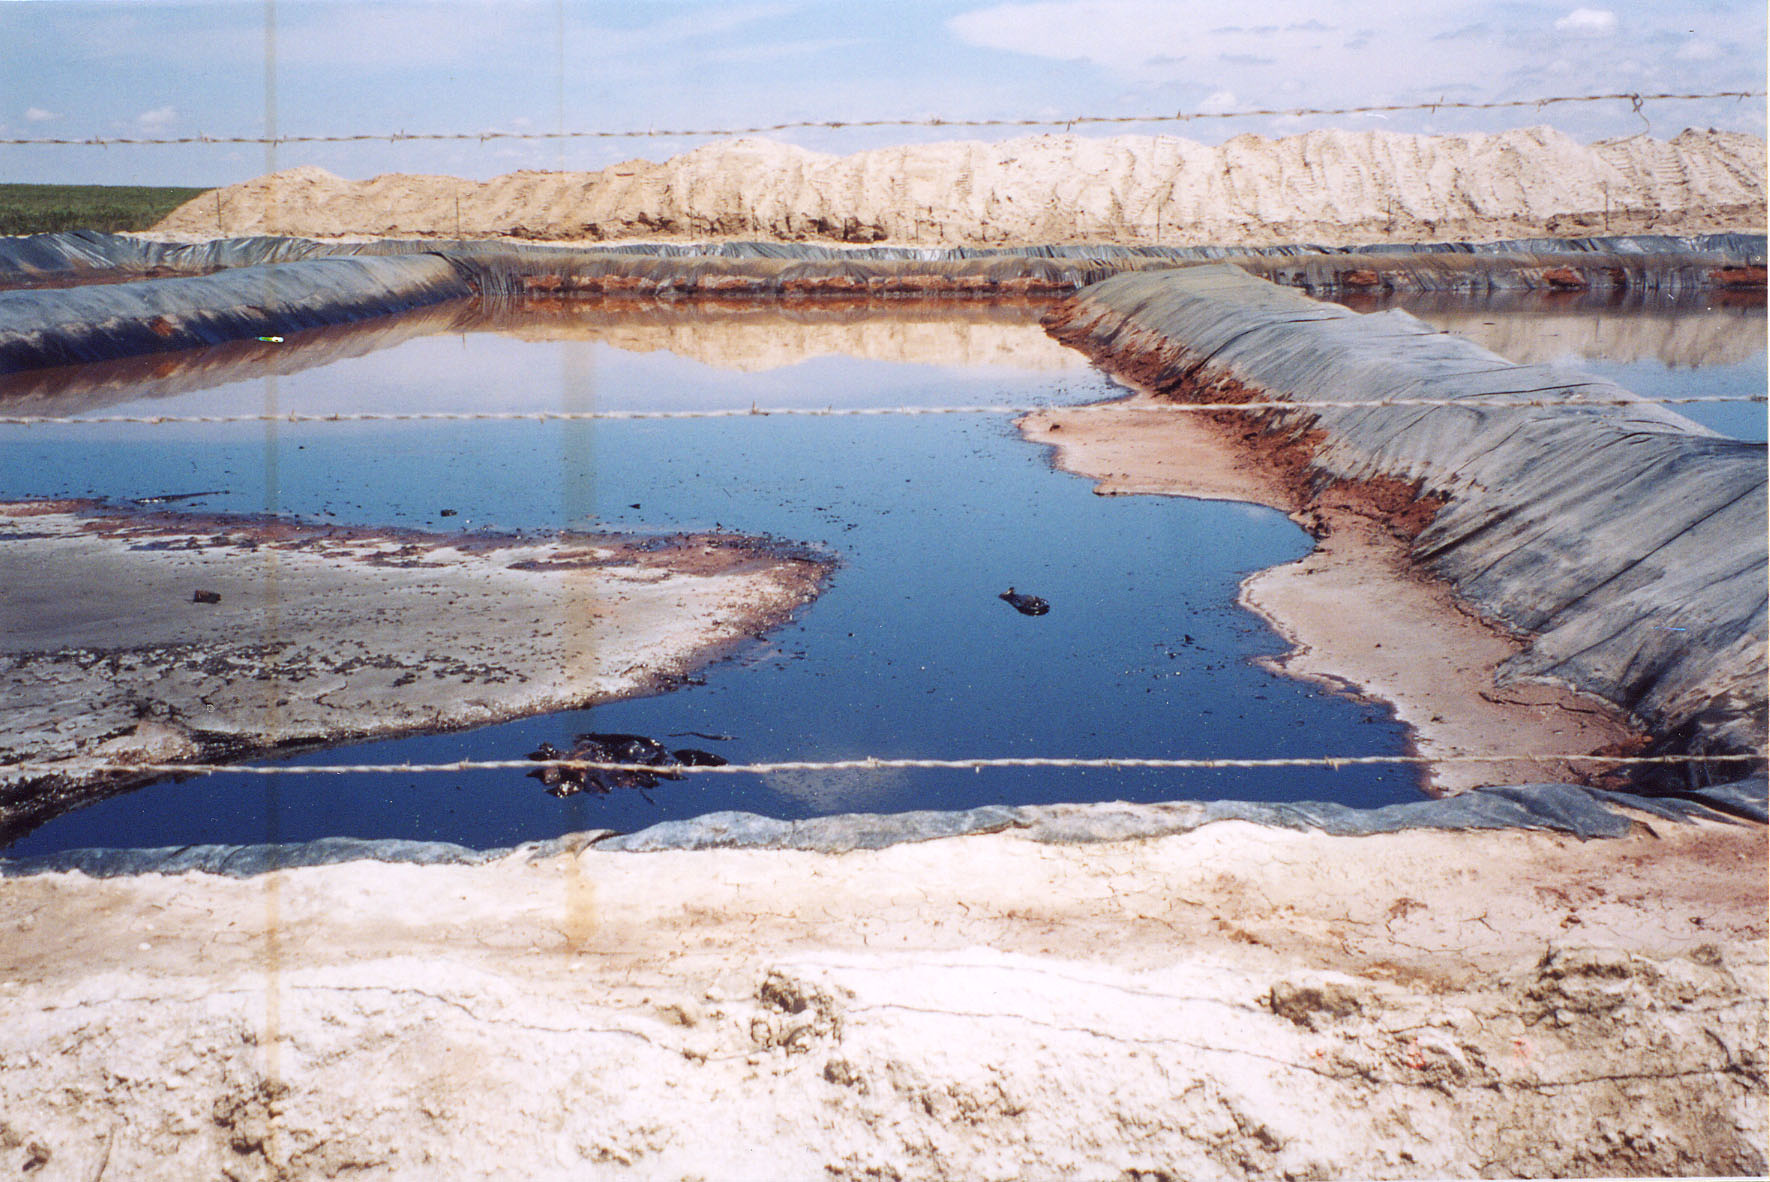 No netting on oily pit in SE New Mexico.  Photo credit: Carl Johnson